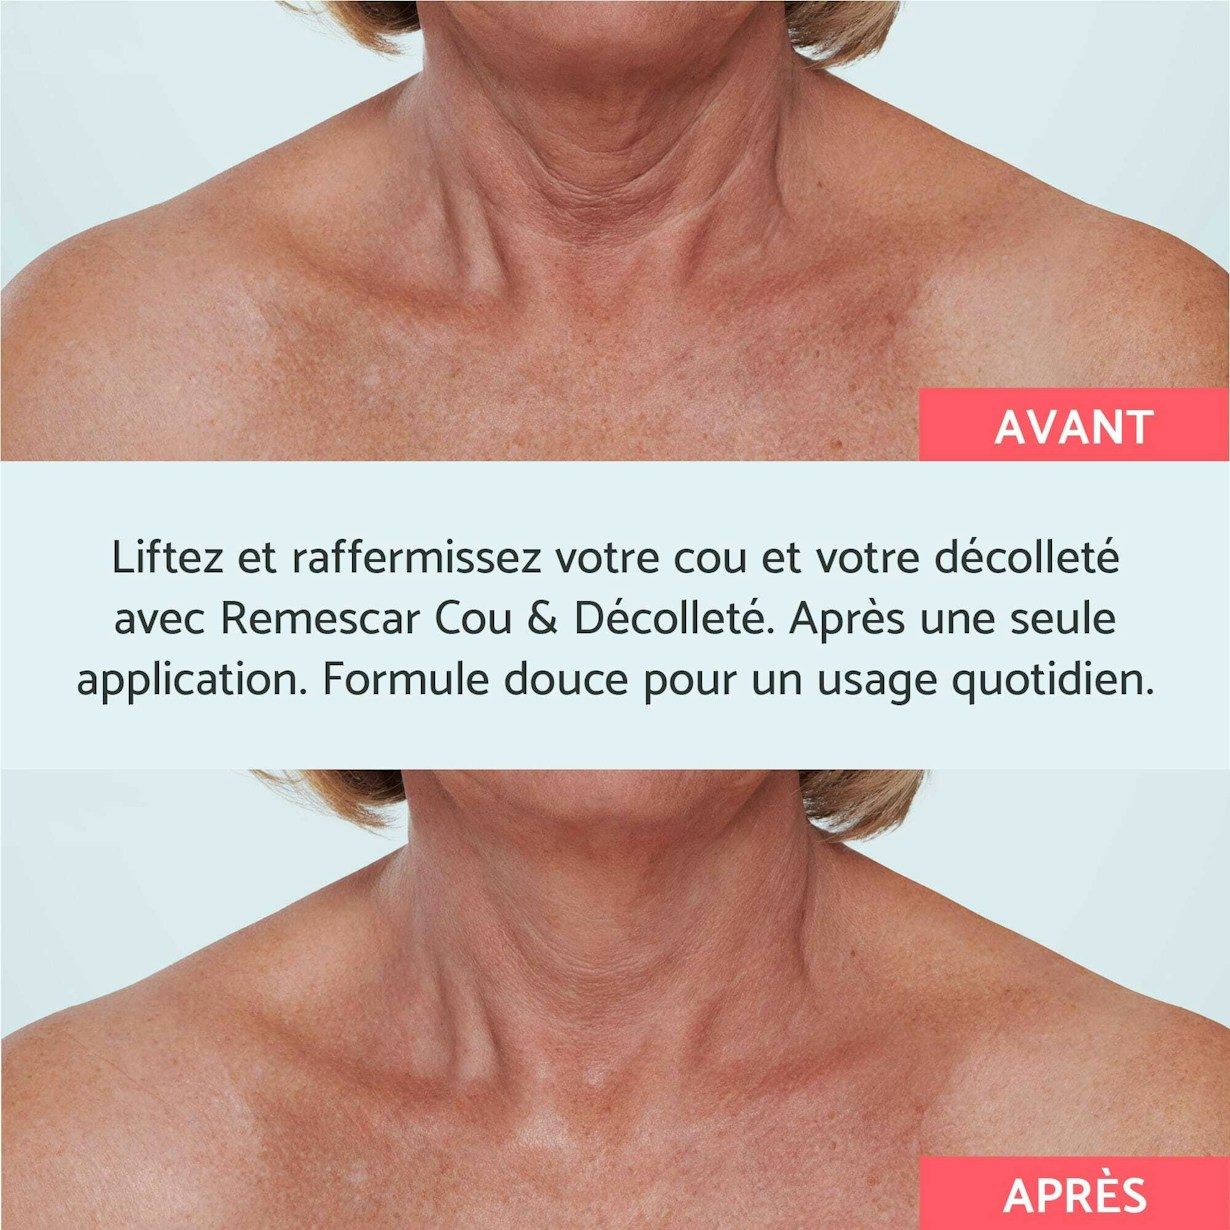 Remescar pdp pictures website and amazon 2000x2000px instant neck and decollete FR3